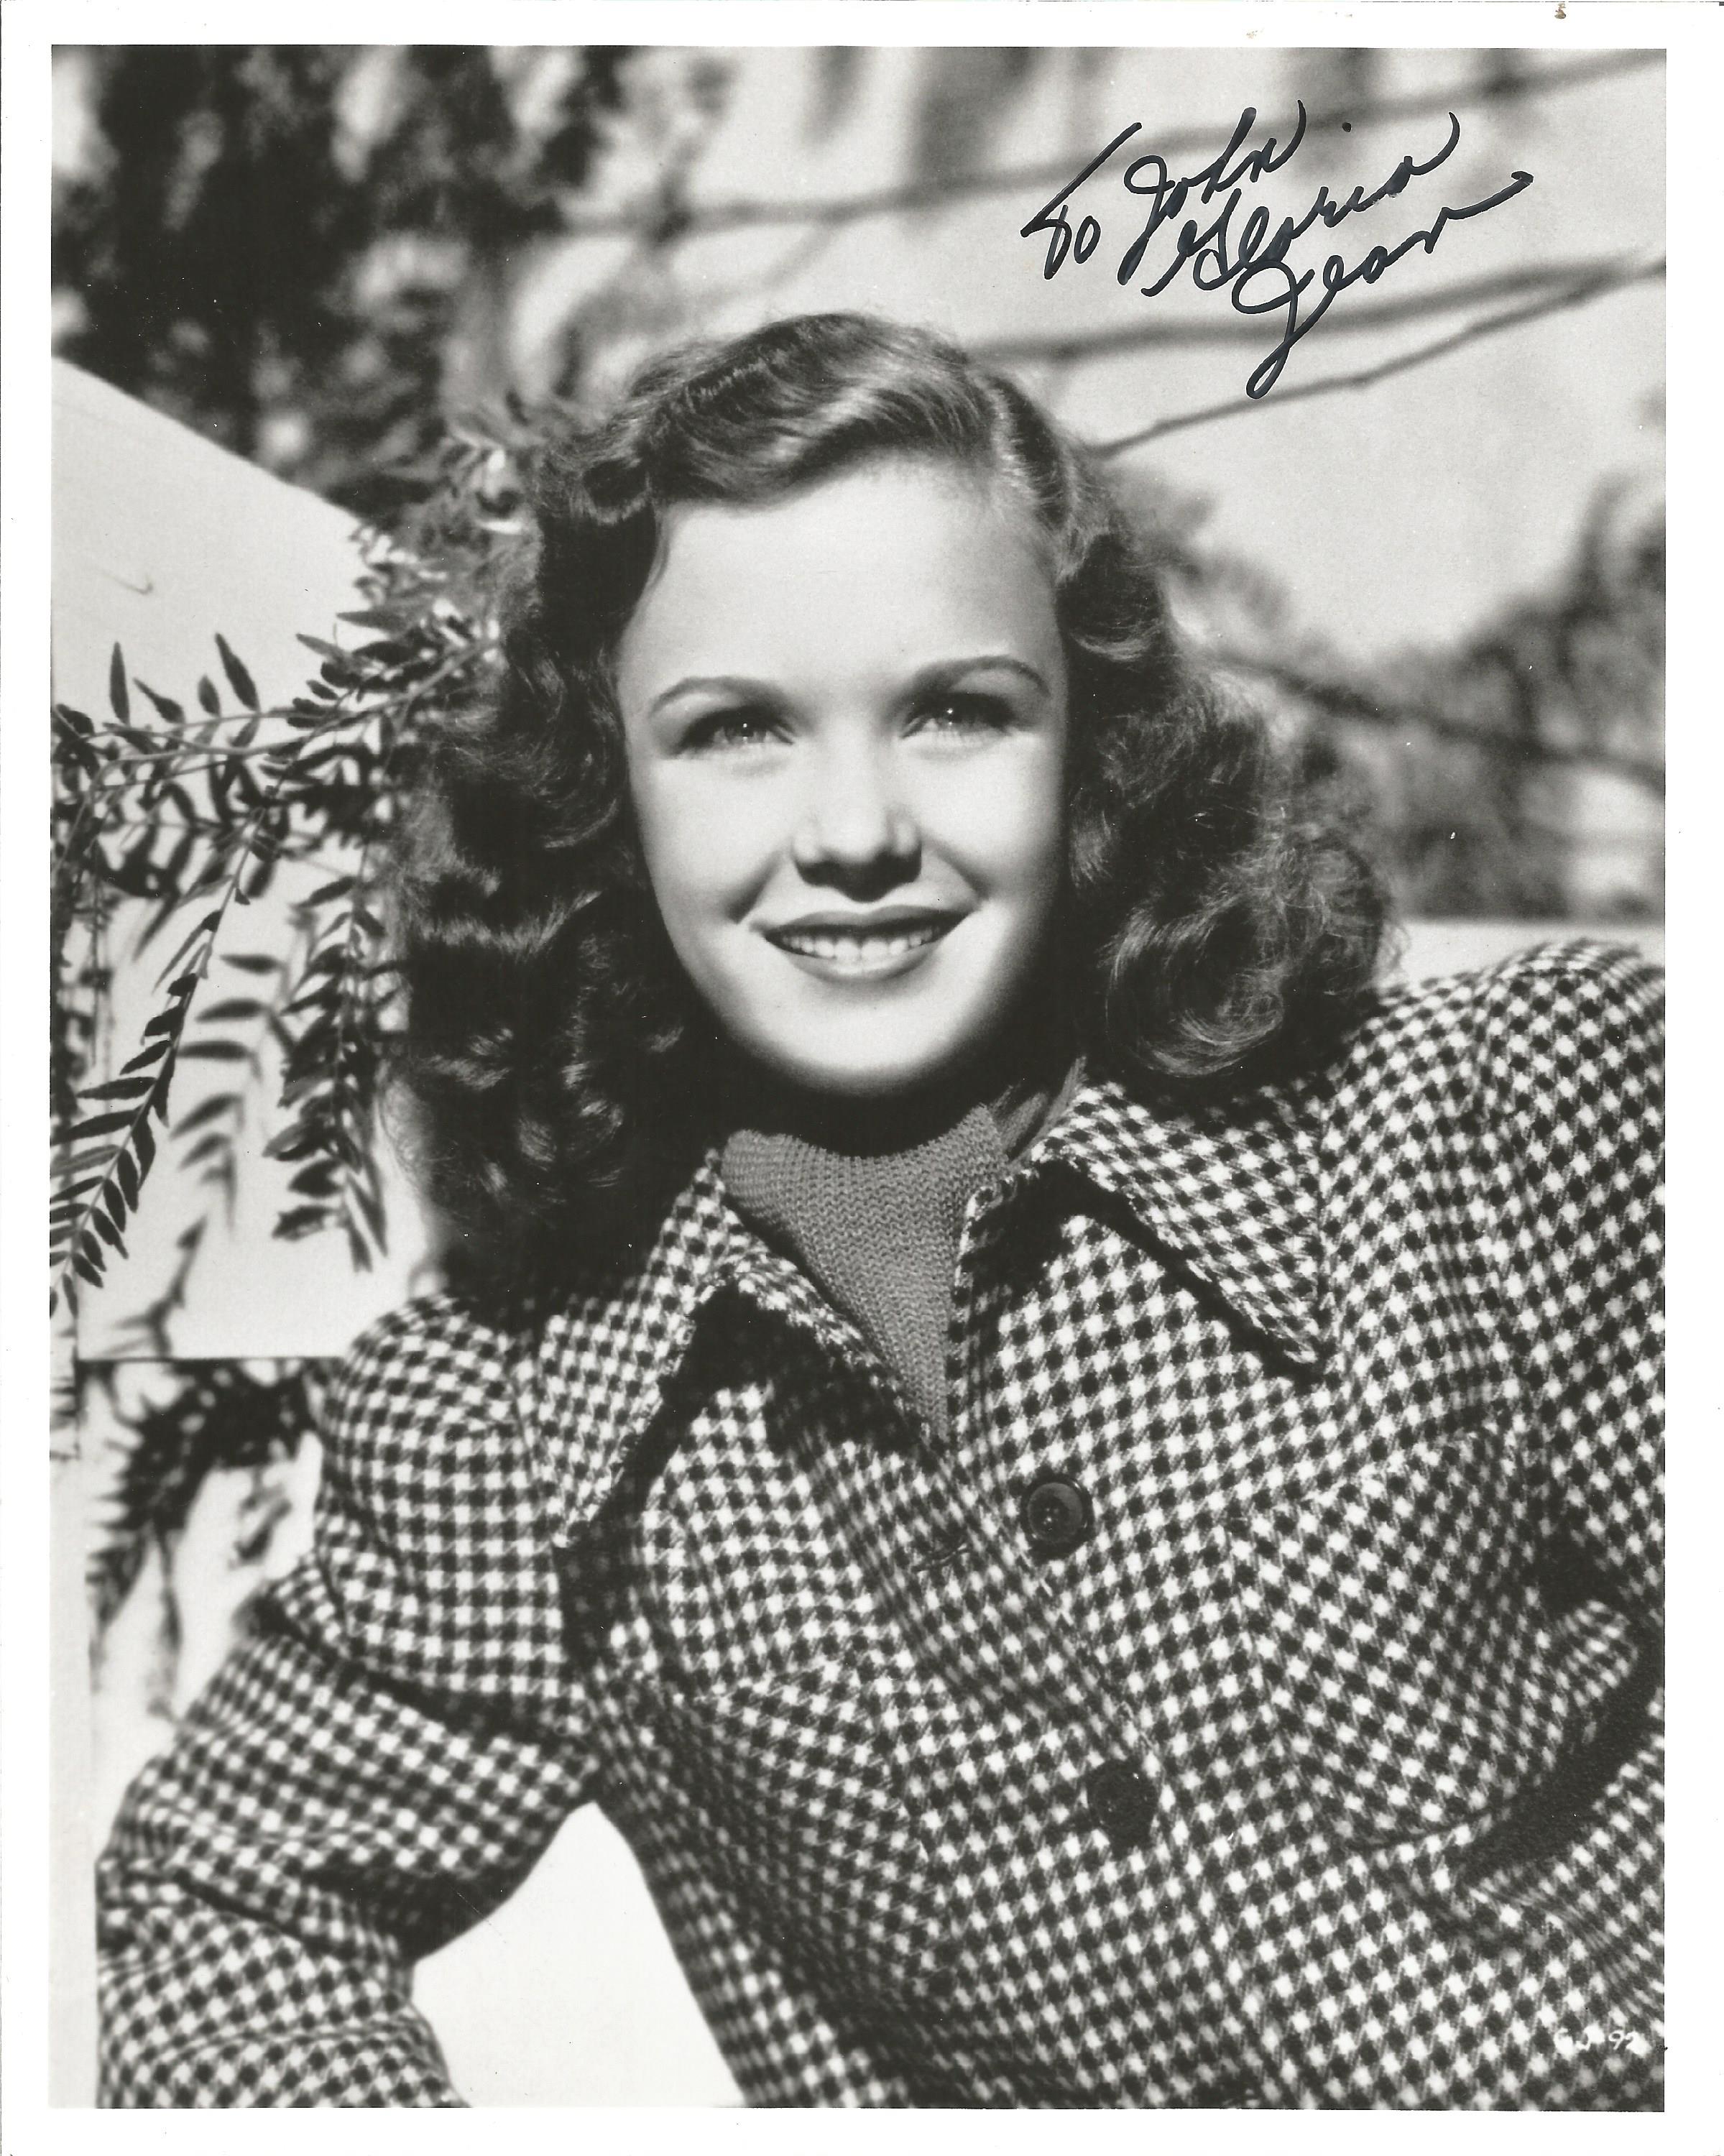 Gloria Jean Actress Signed 8x10 Photo. Good Condition. All autographs are genuine hand signed and